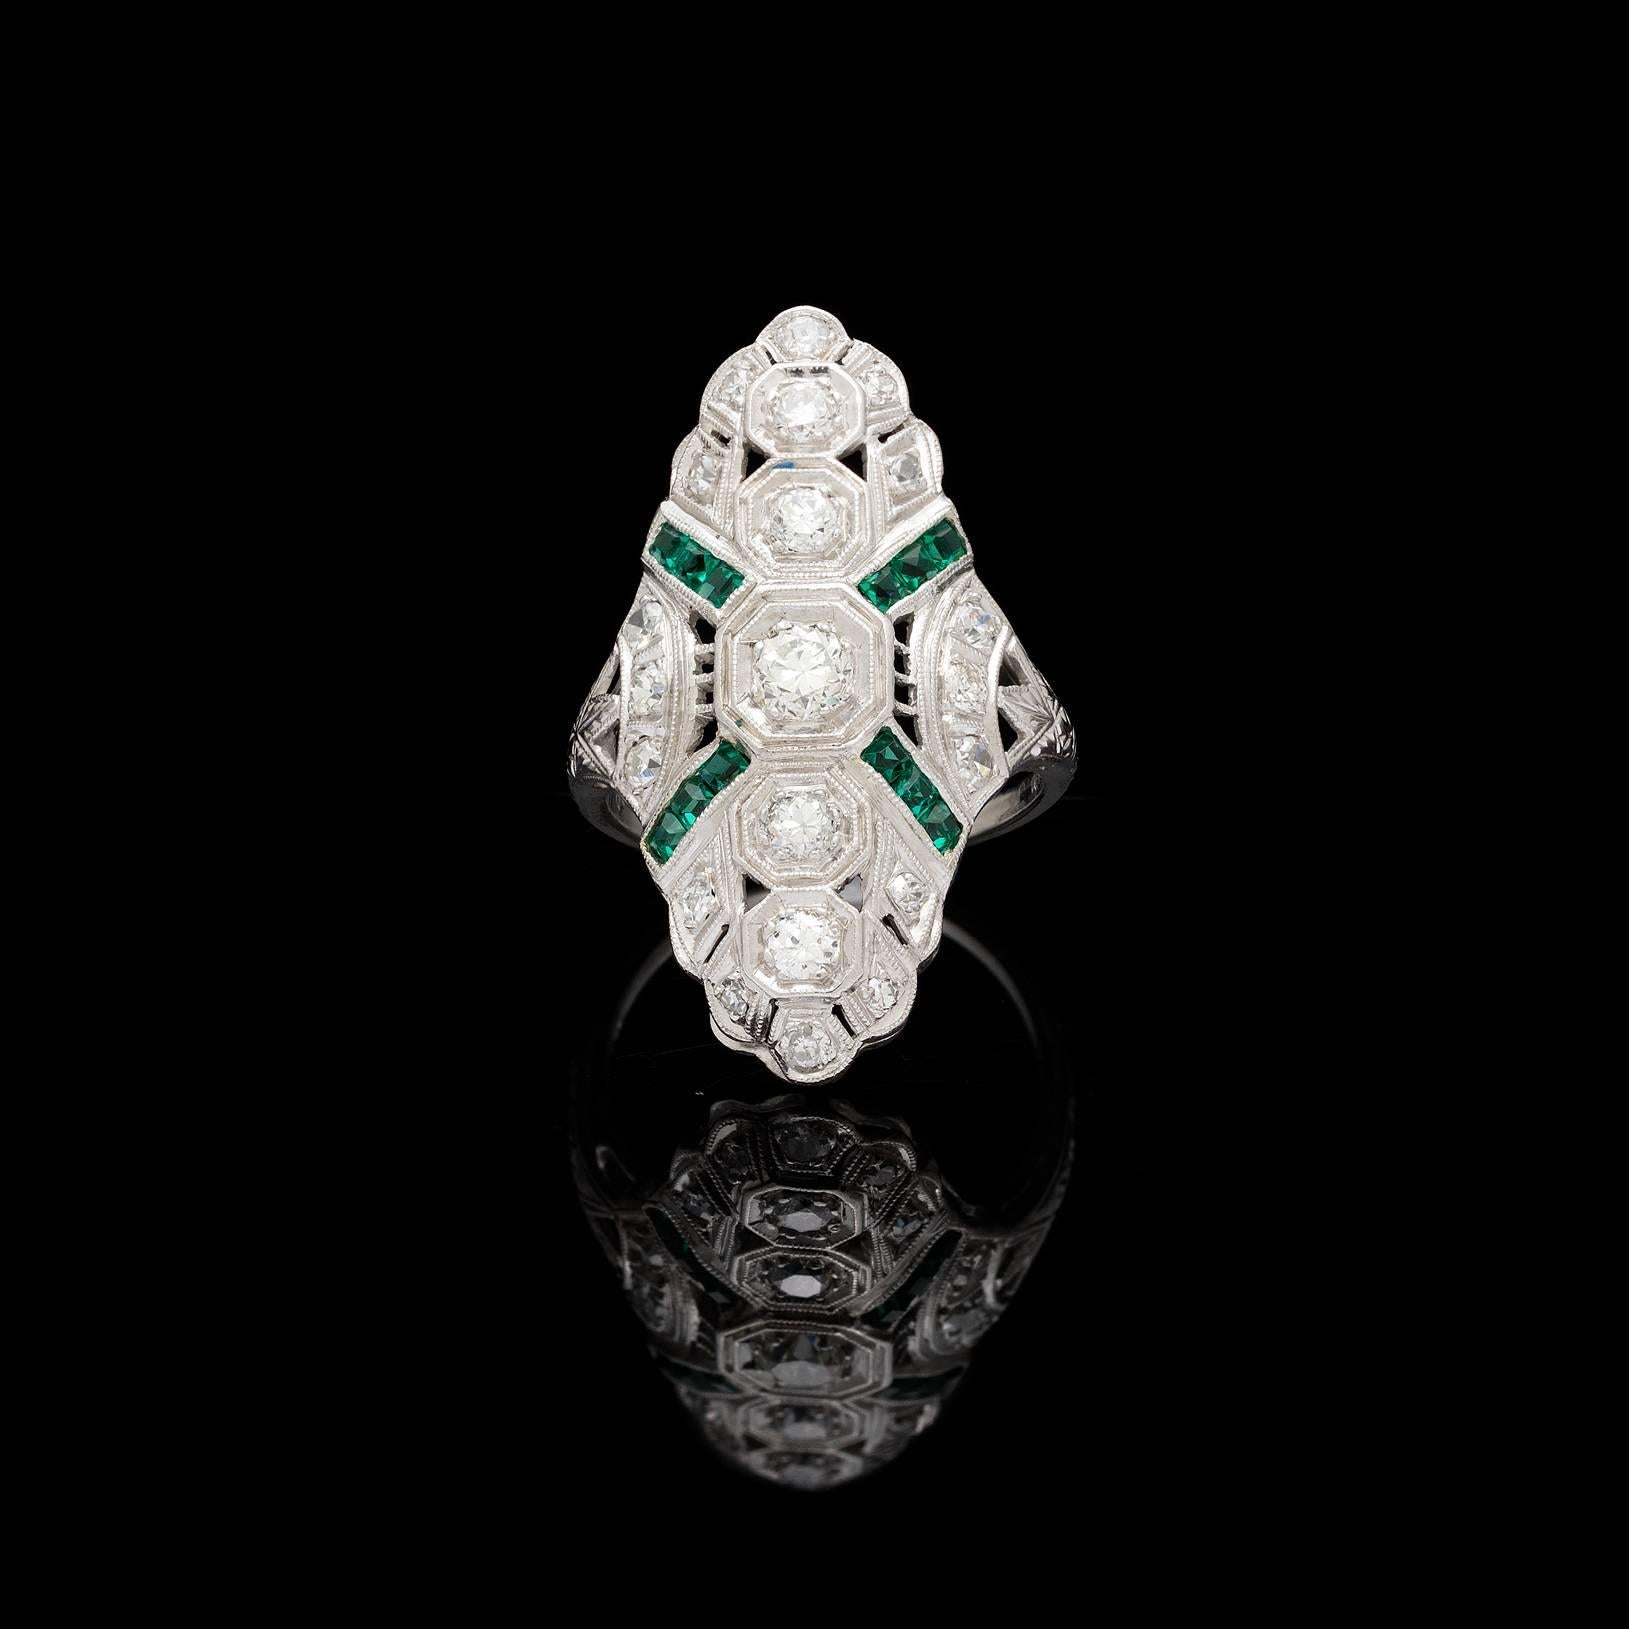 Deco platinum north south style ring set with 5 round transitional cut diamonds totaling 0.70 carats. Accenting the ring are melee size single cut diamonds and synthetic emeralds which are indicative of this period piece. The top of the ring